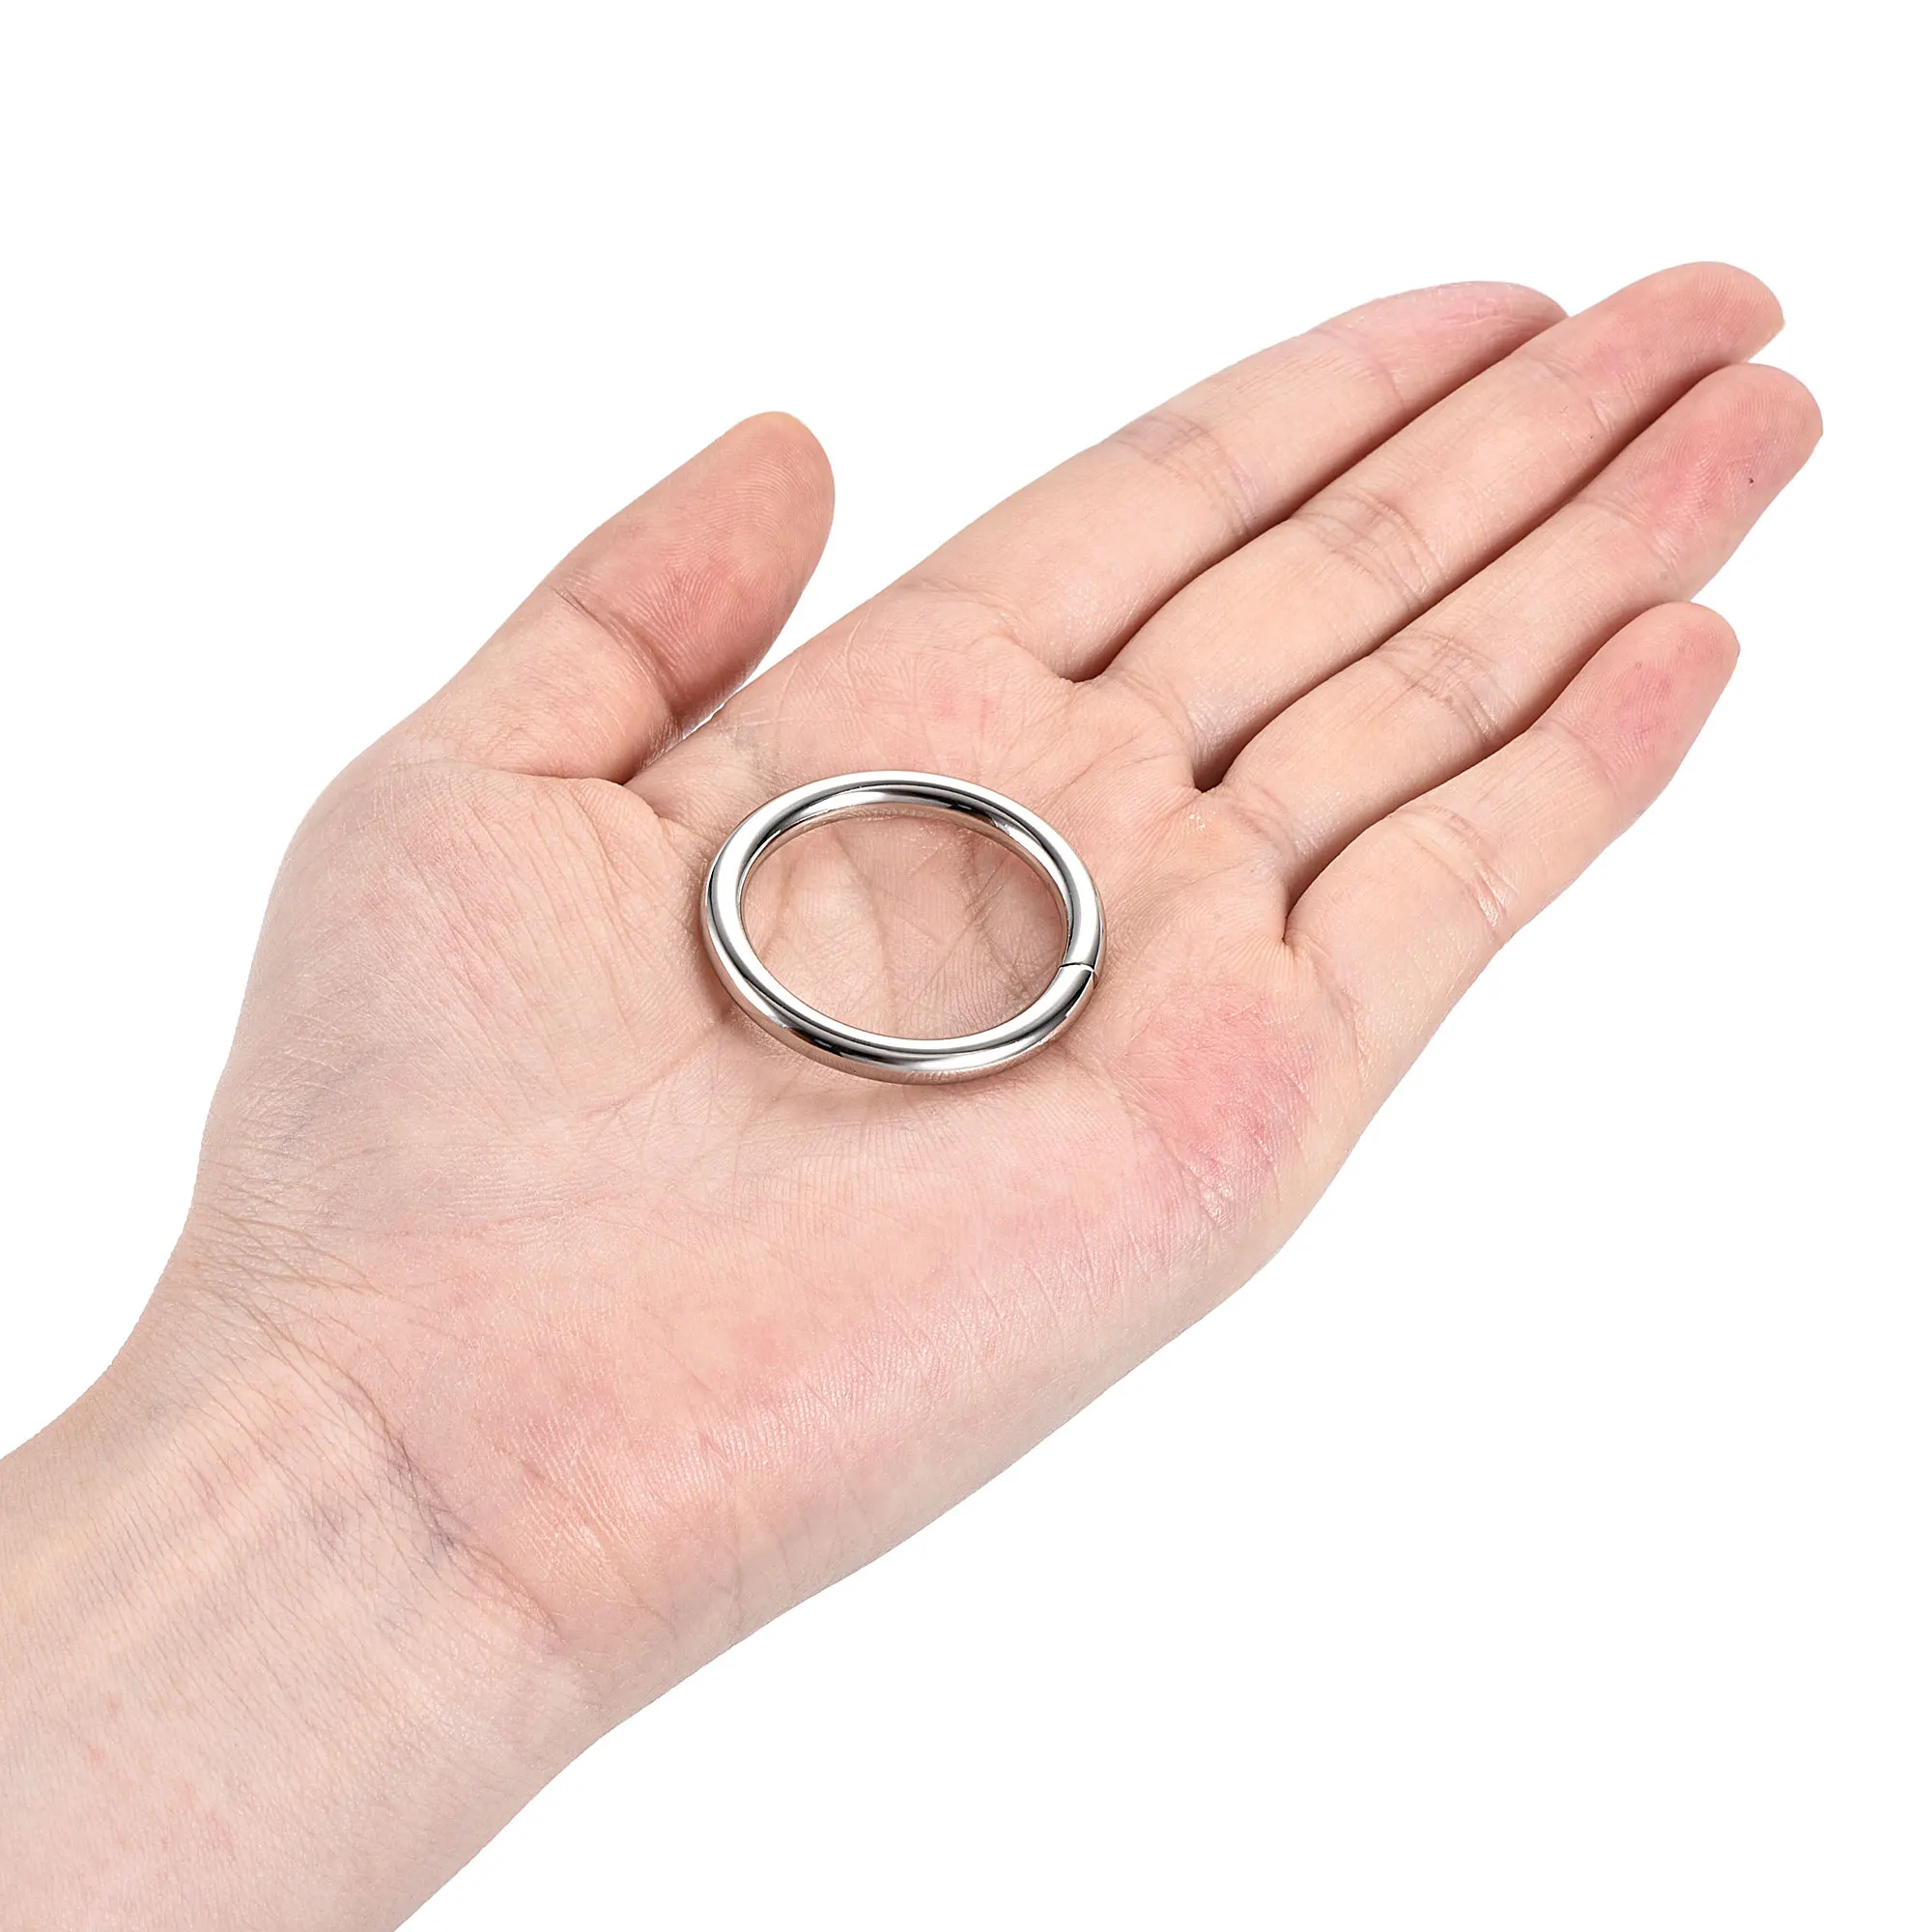 0.98" ID 3.8mm Thickness Iron Rings for DIY Silver Tone 10pcs Metal O Ring 25mm 